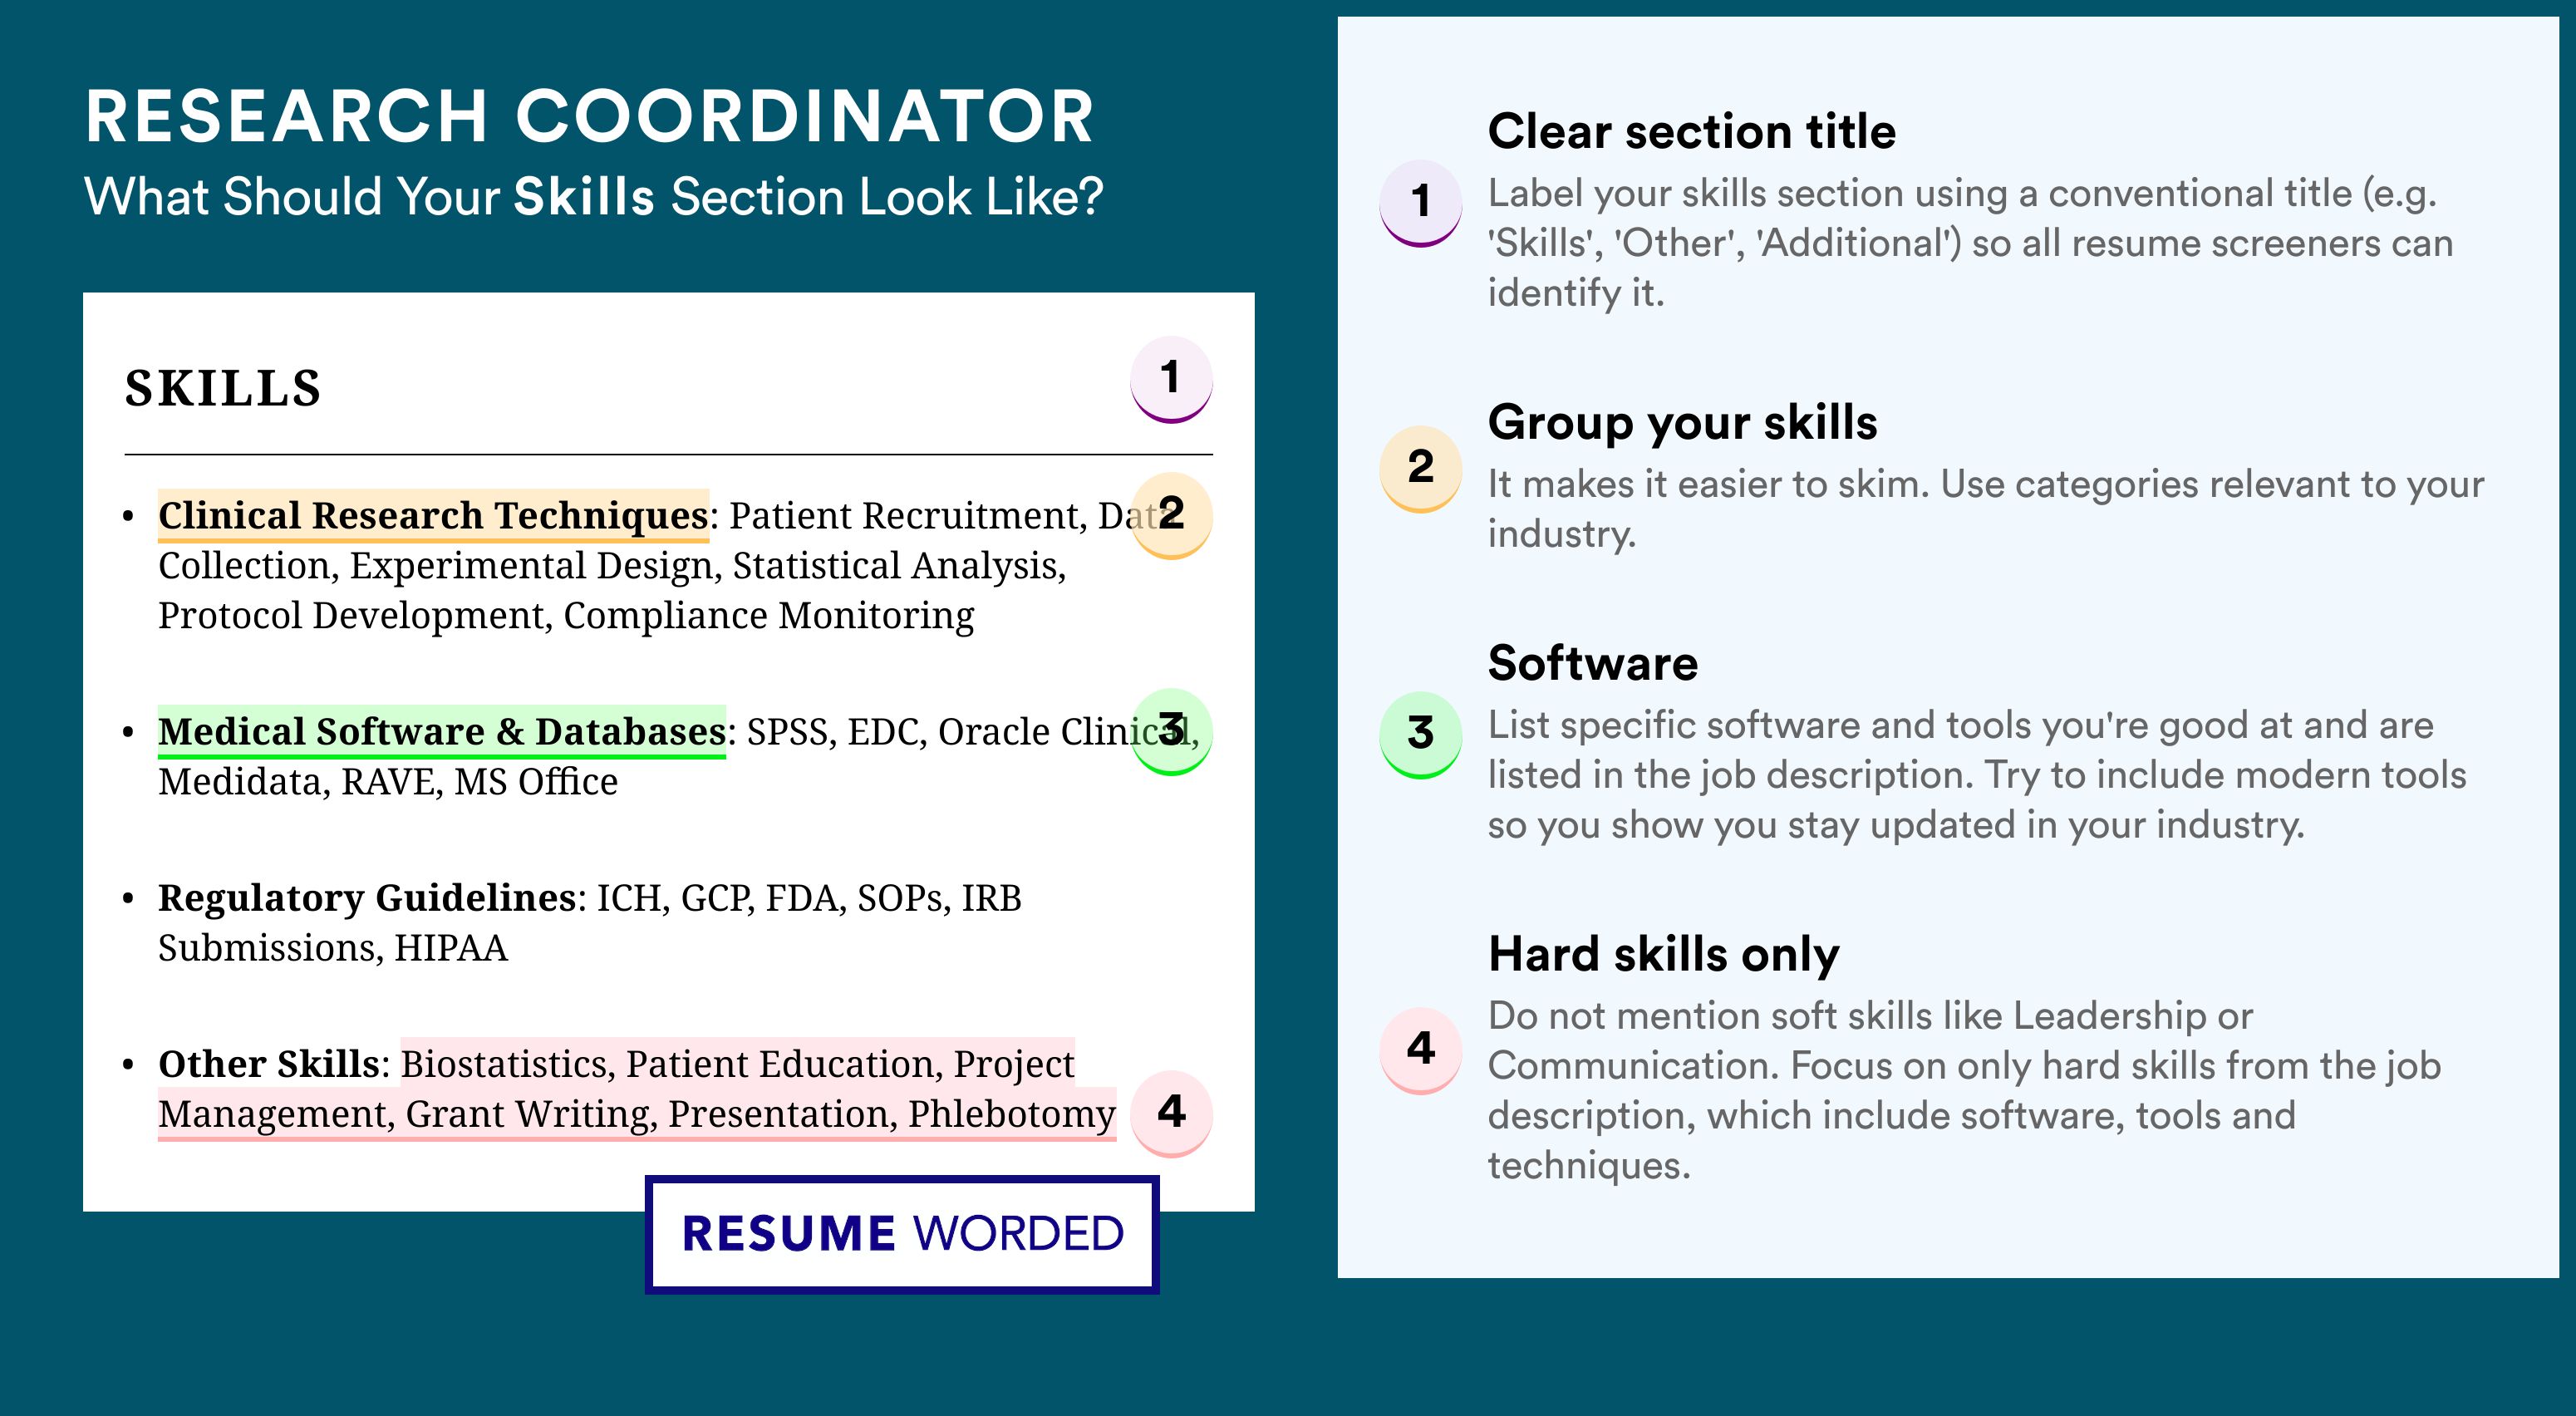 How To Write Your Skills Section - Research Coordinator Roles